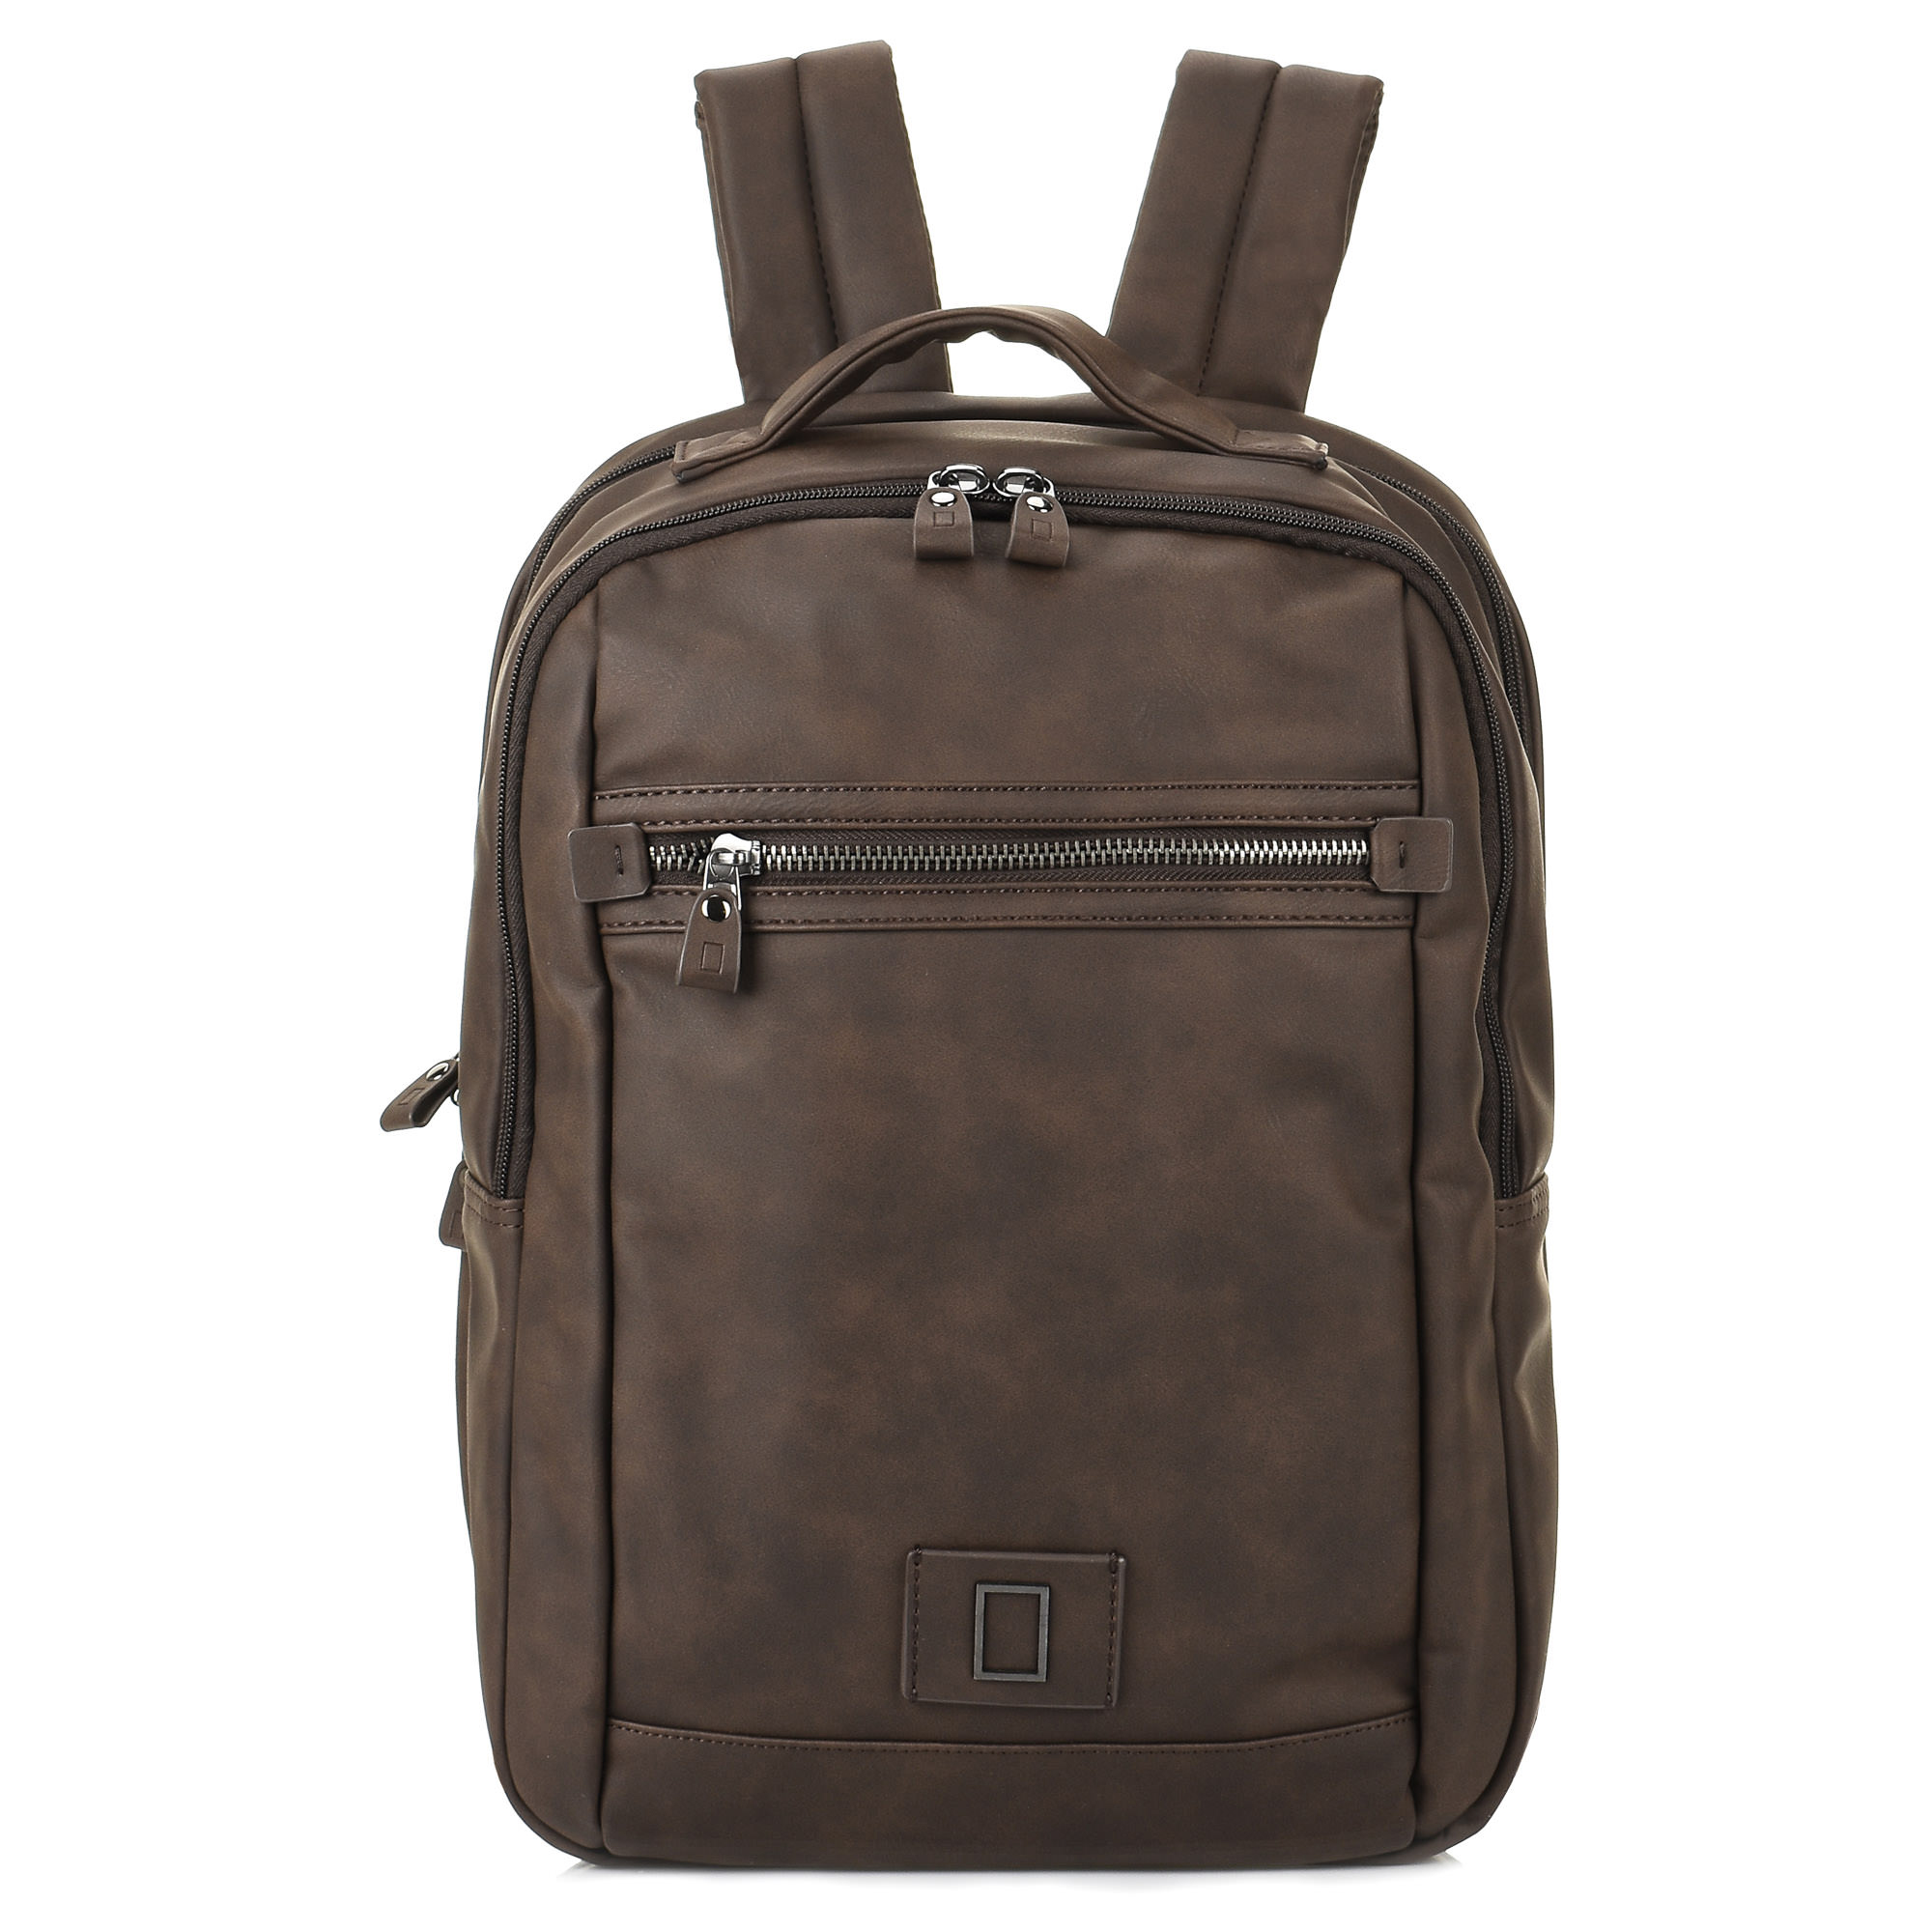 National Geographic Σακίδιο Πλάτης National Geographic Slope Backpack N10585.33 Brown